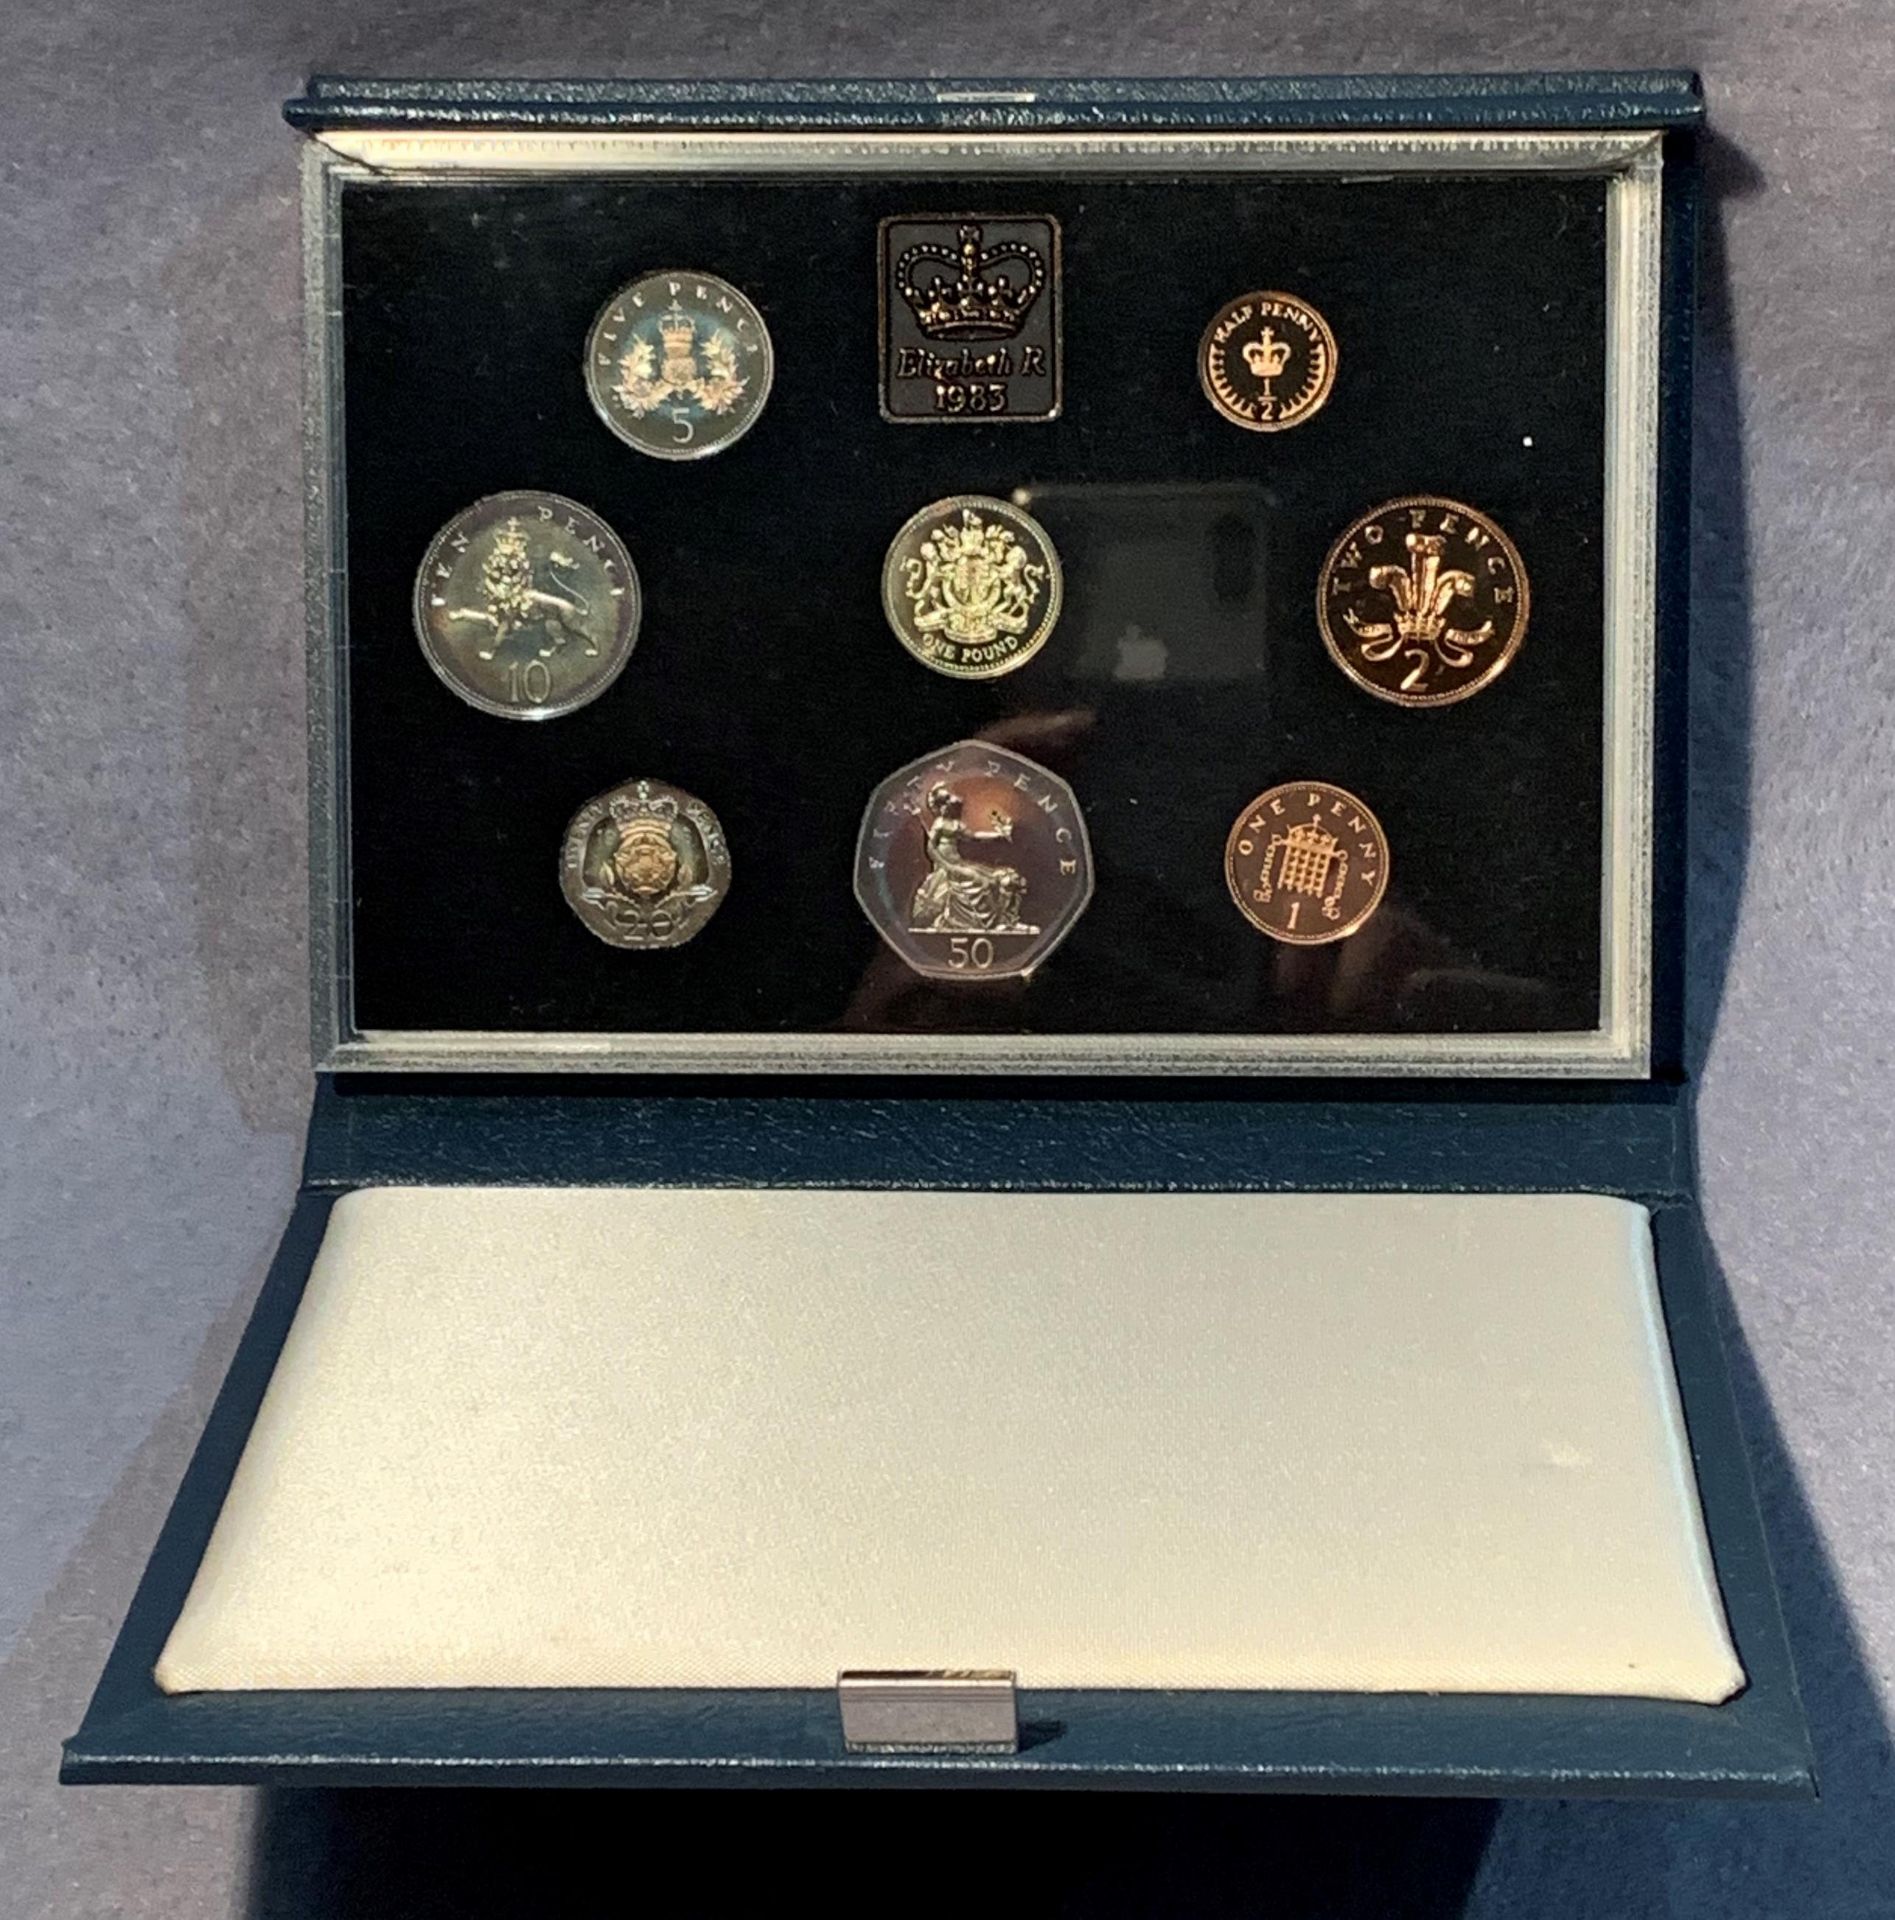 A 1983 Royal Mint UK proof coin collection in case